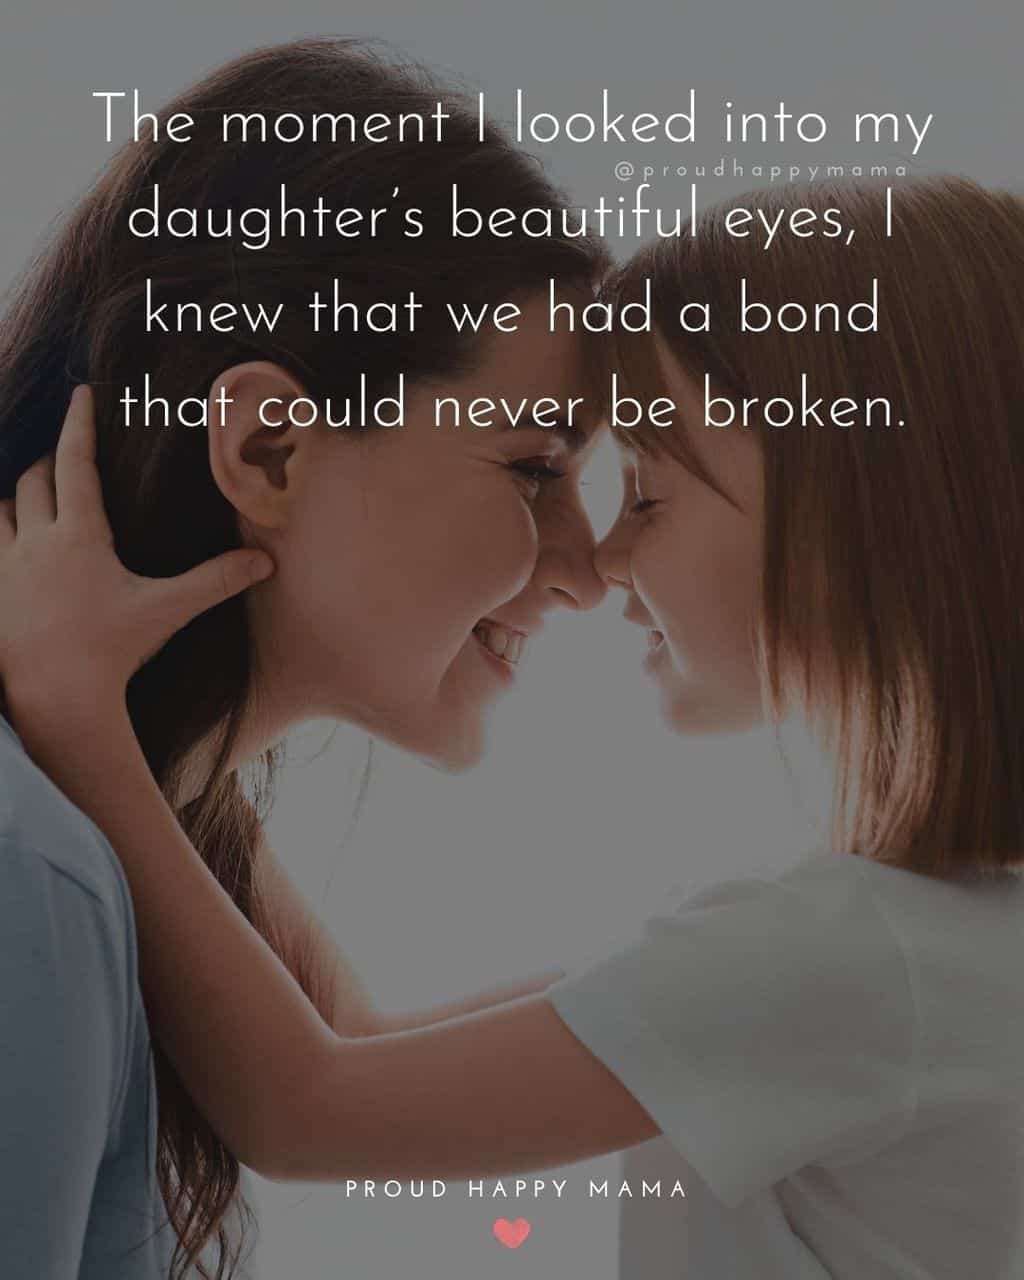 daughter caption - ‘The moment I looked into my daughter’s beautiful eyes, I knew that we had a bond that could never be broken.’